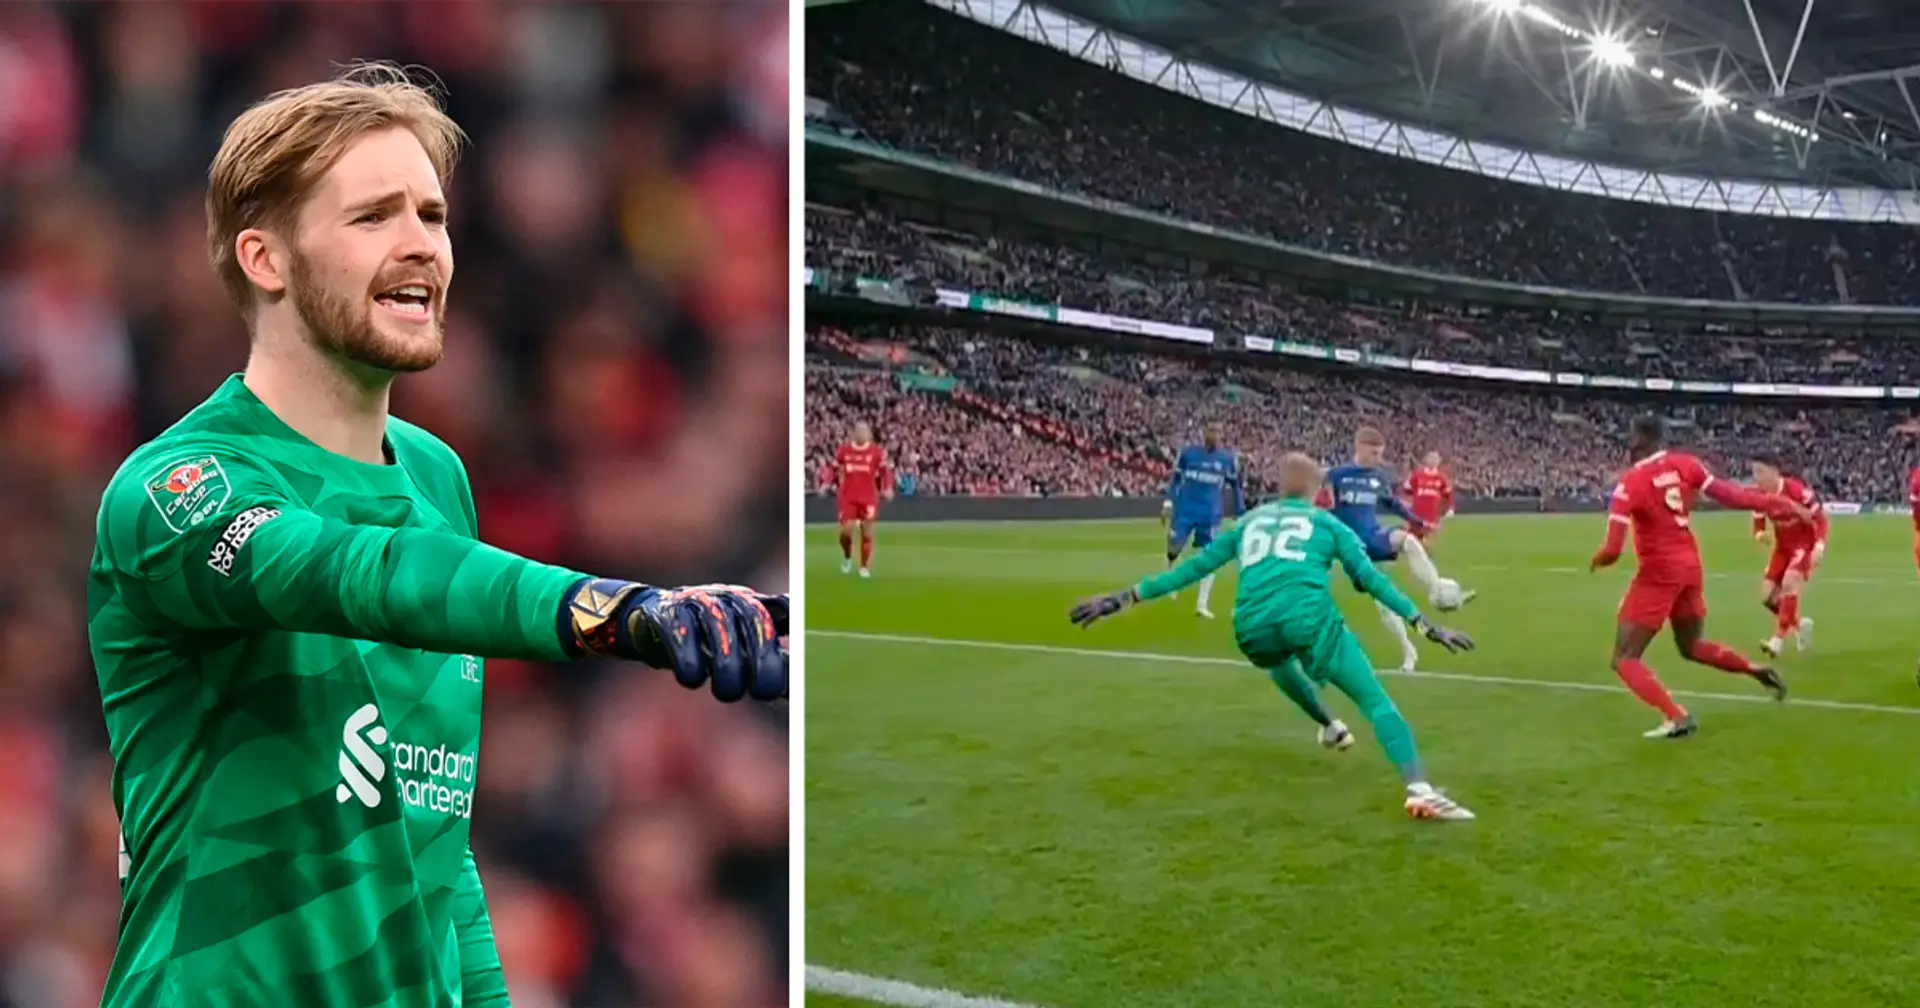 'Really a different beast in the finals': Liverpool fans are thrilled by Kelleher's save after Palmer's close-range shot